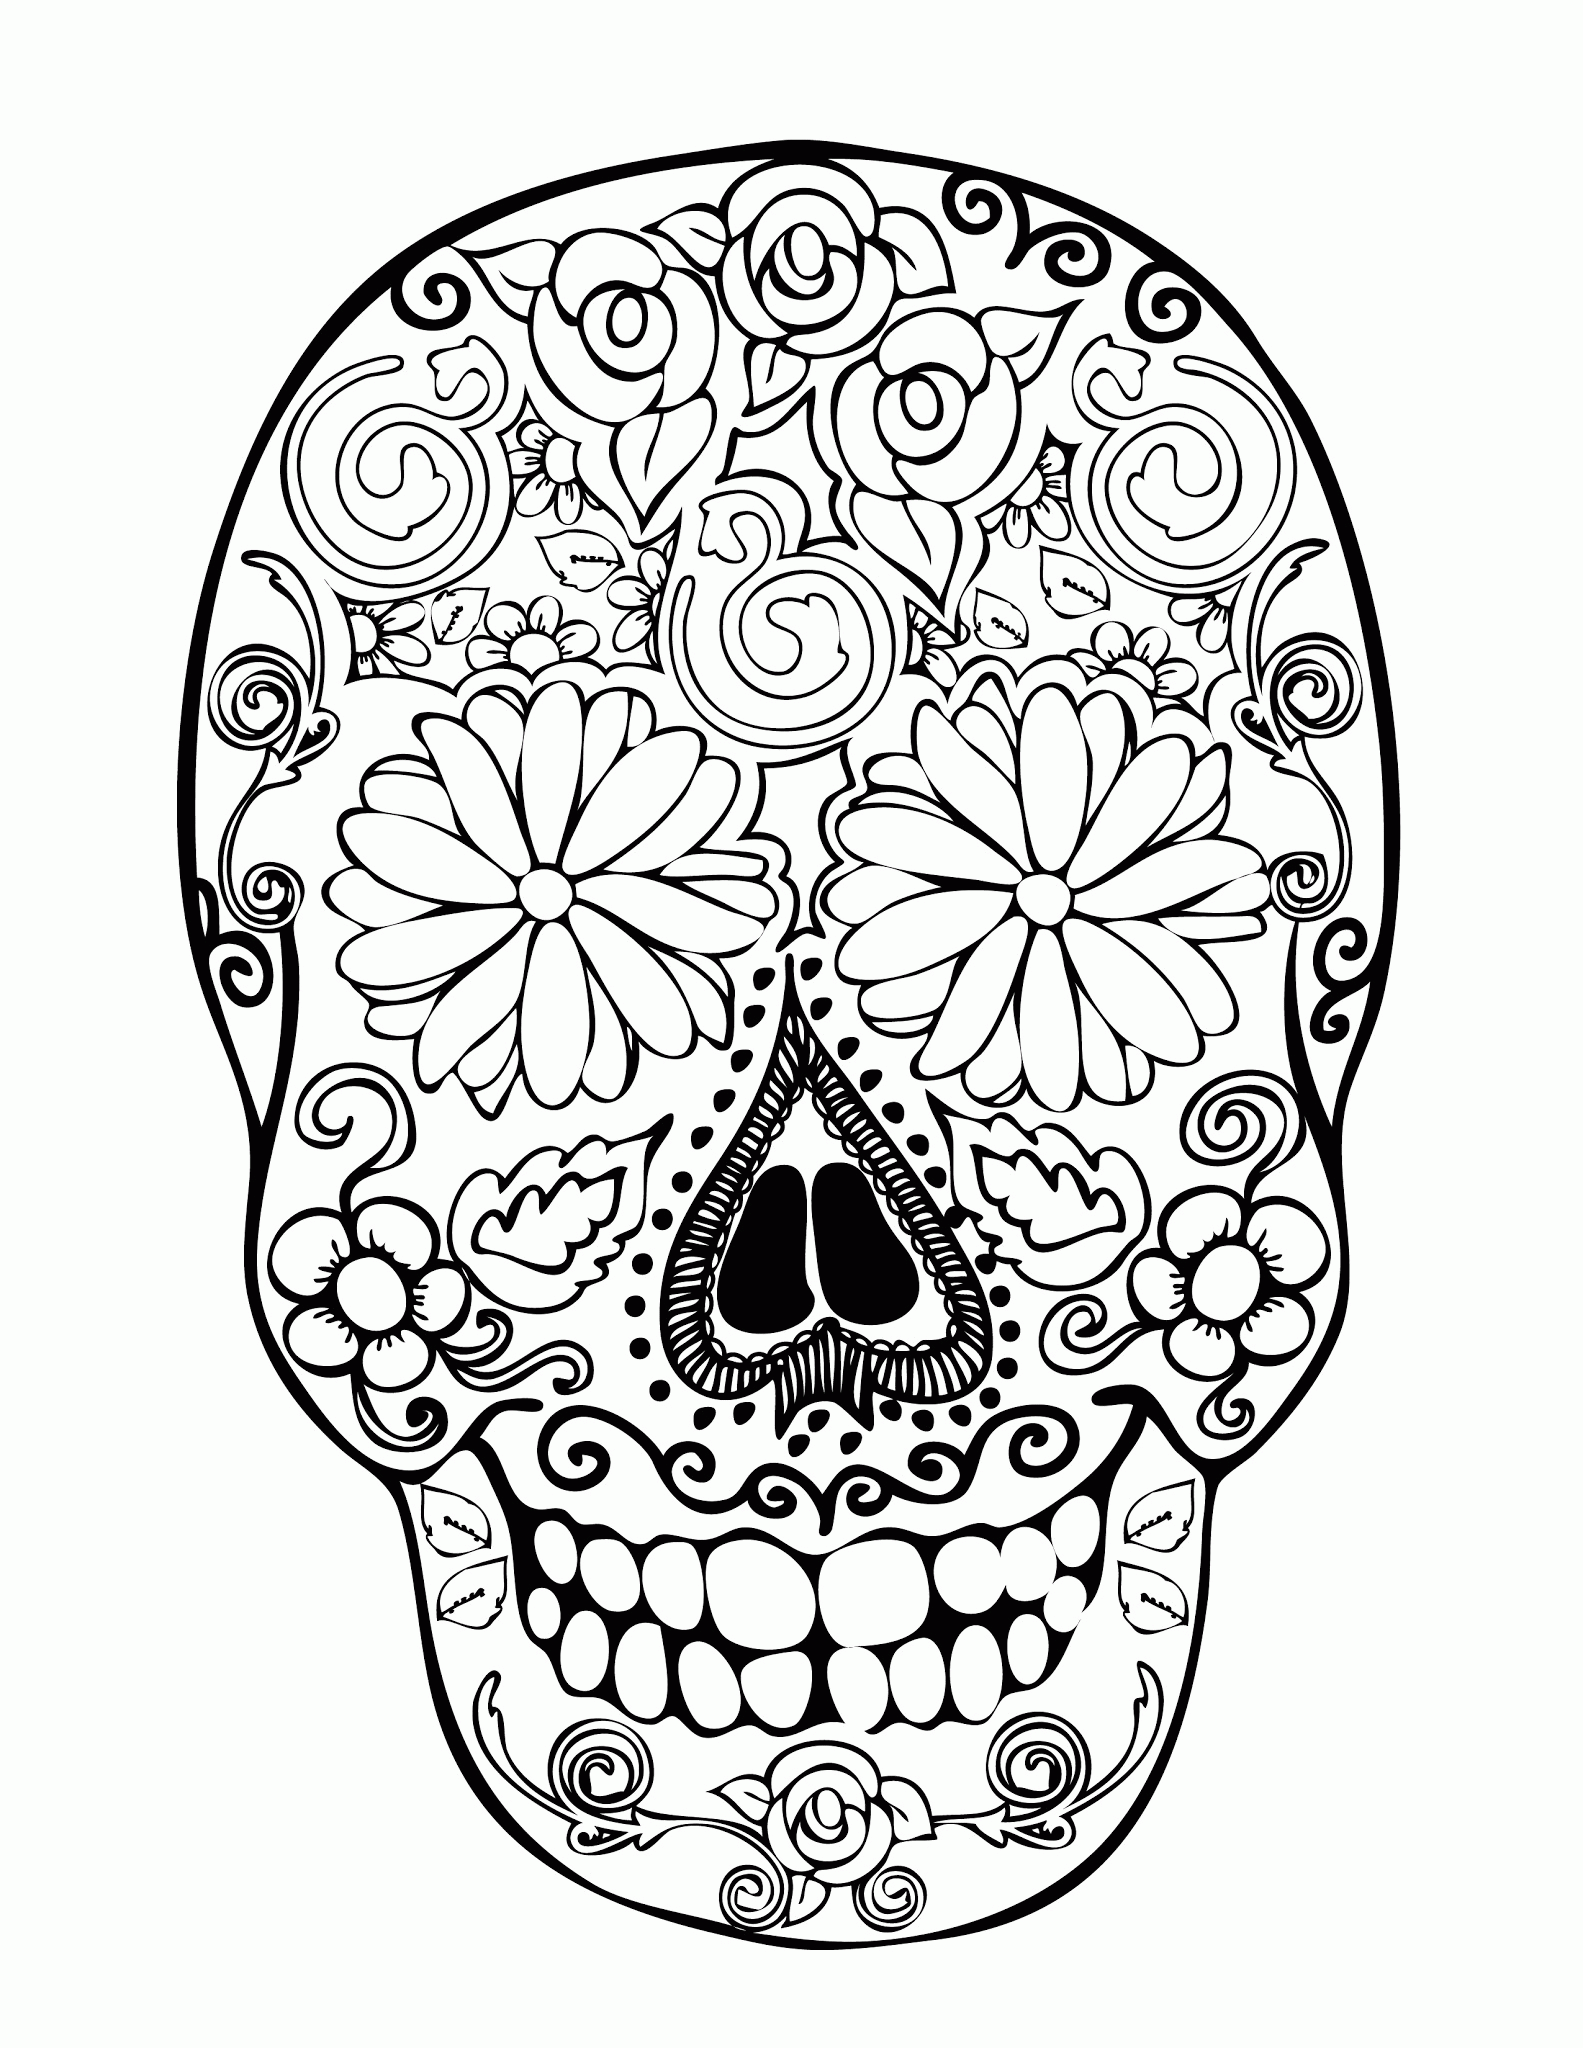 Rose And Skull Coloring Pages For Adults